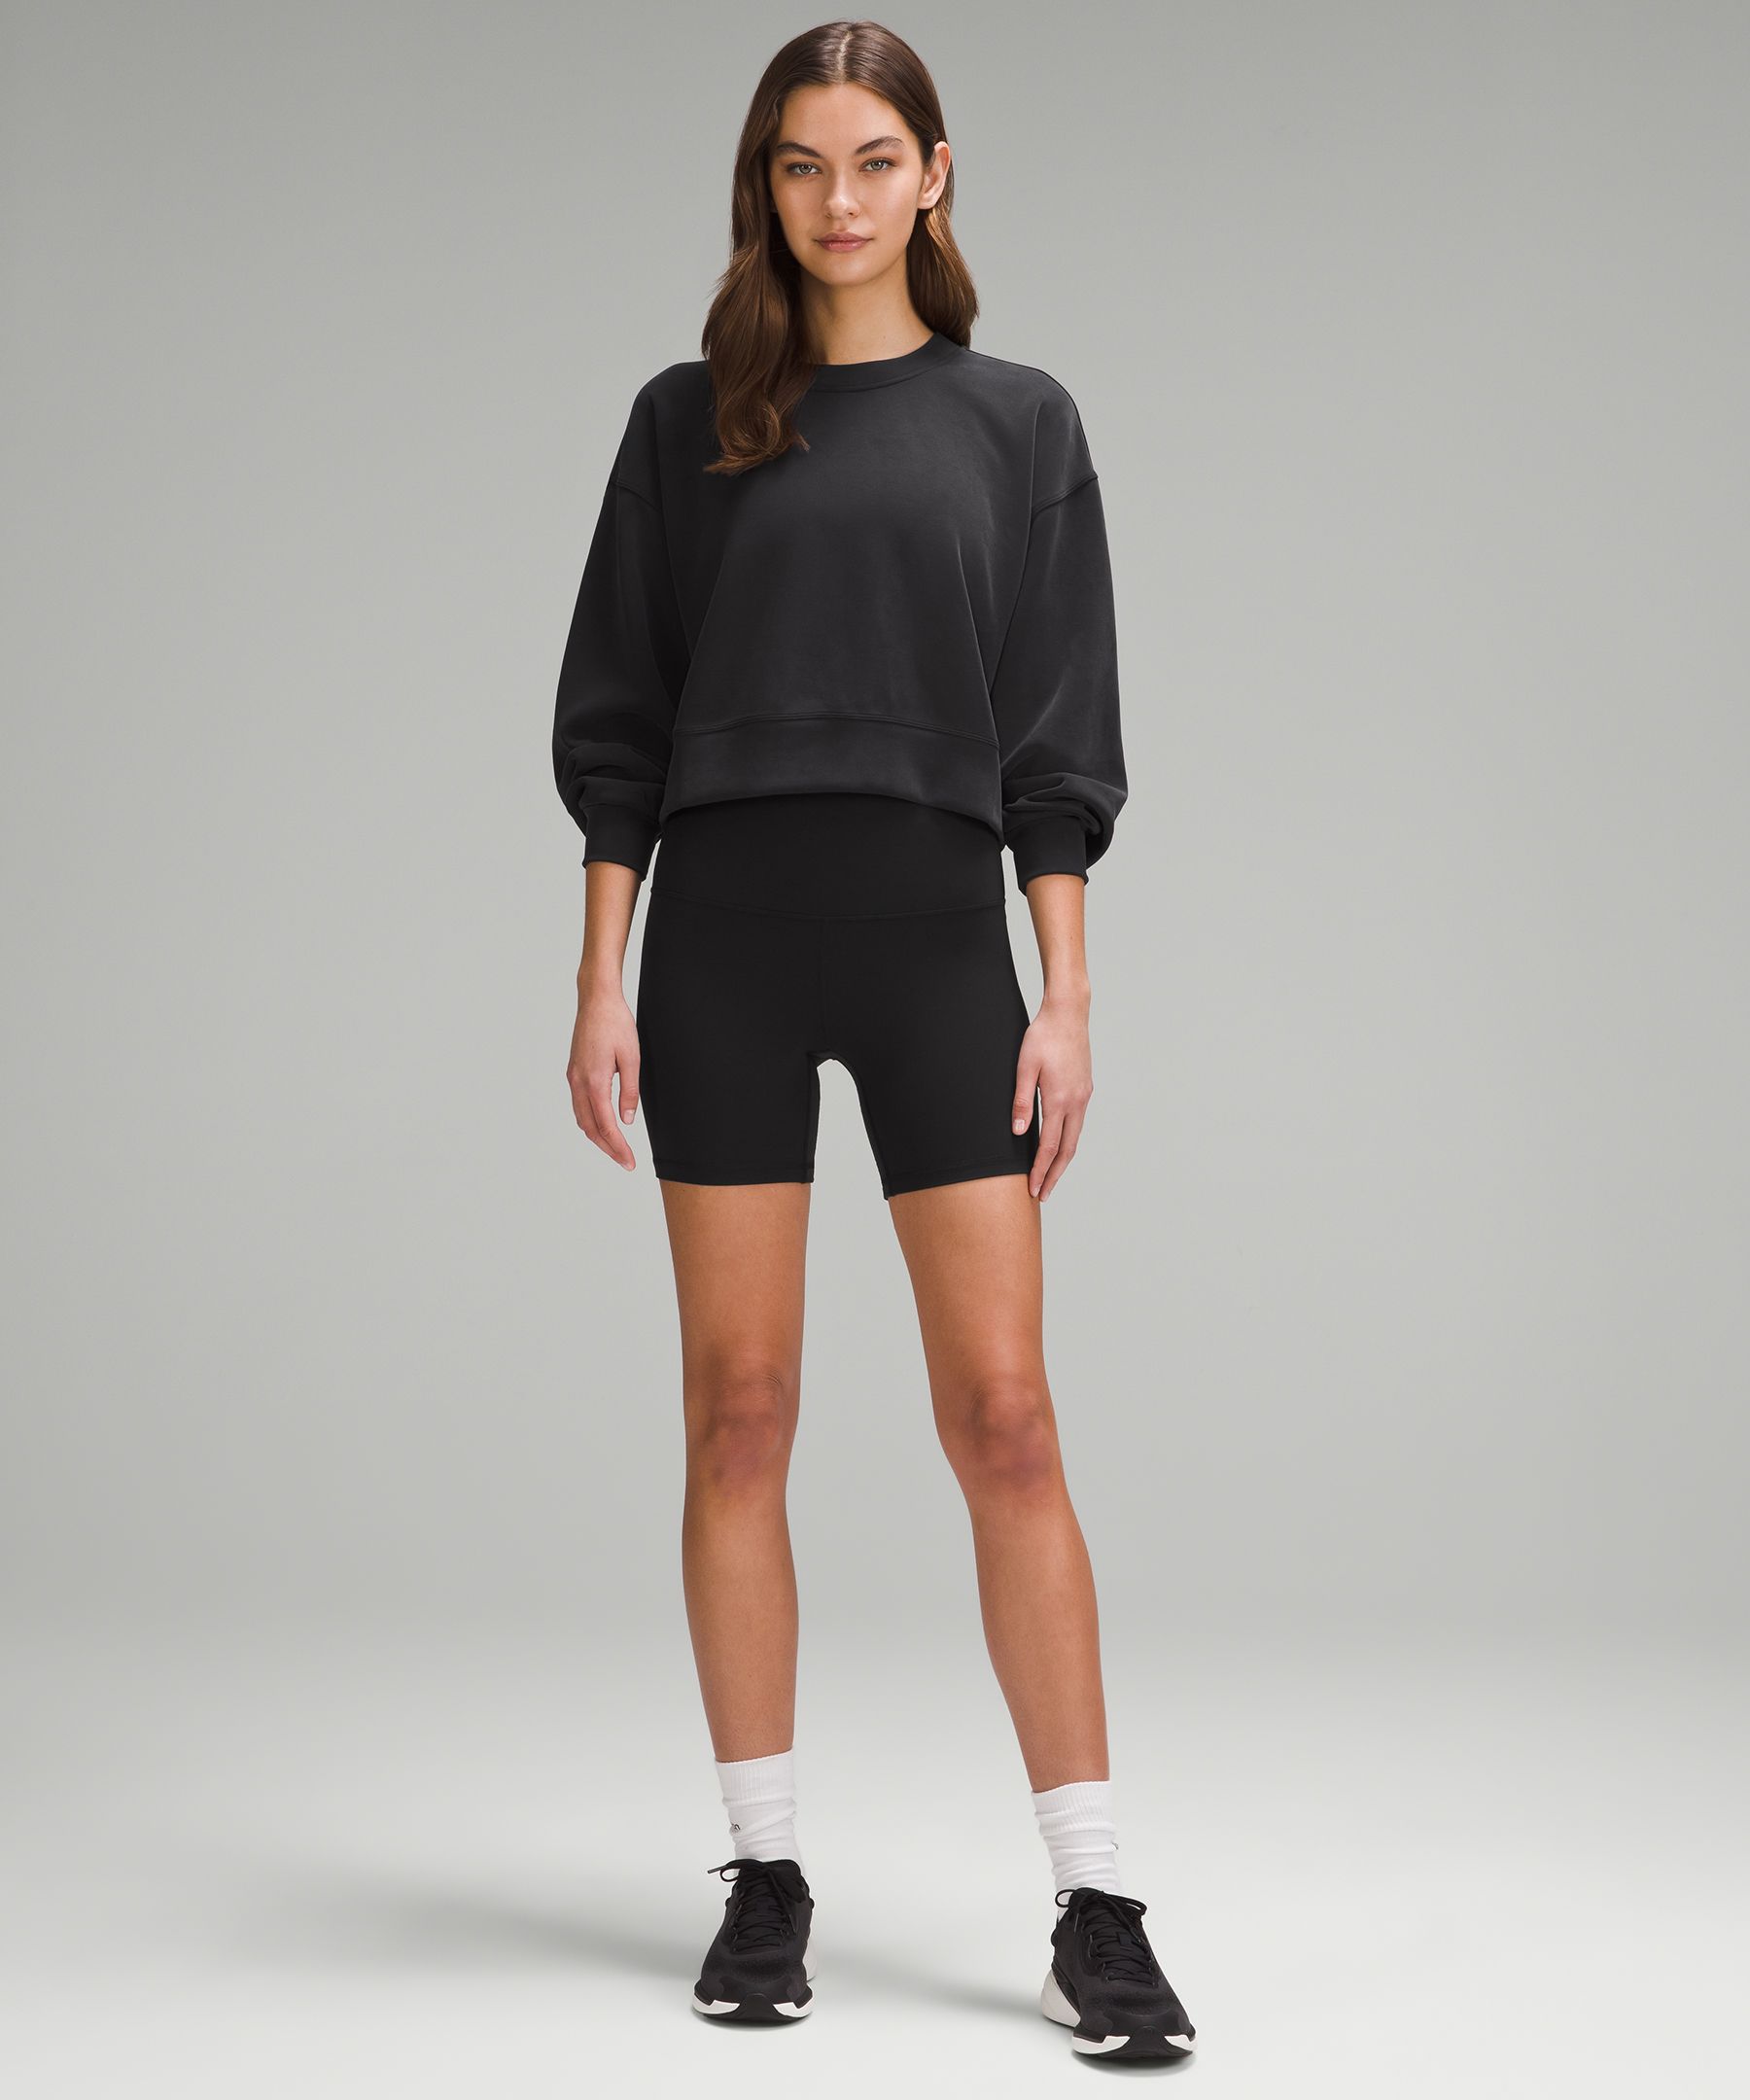 The Fitting Room: Lululemon Lean In LS & Hint of Sheer Cropped Tank -  AthletiKaty